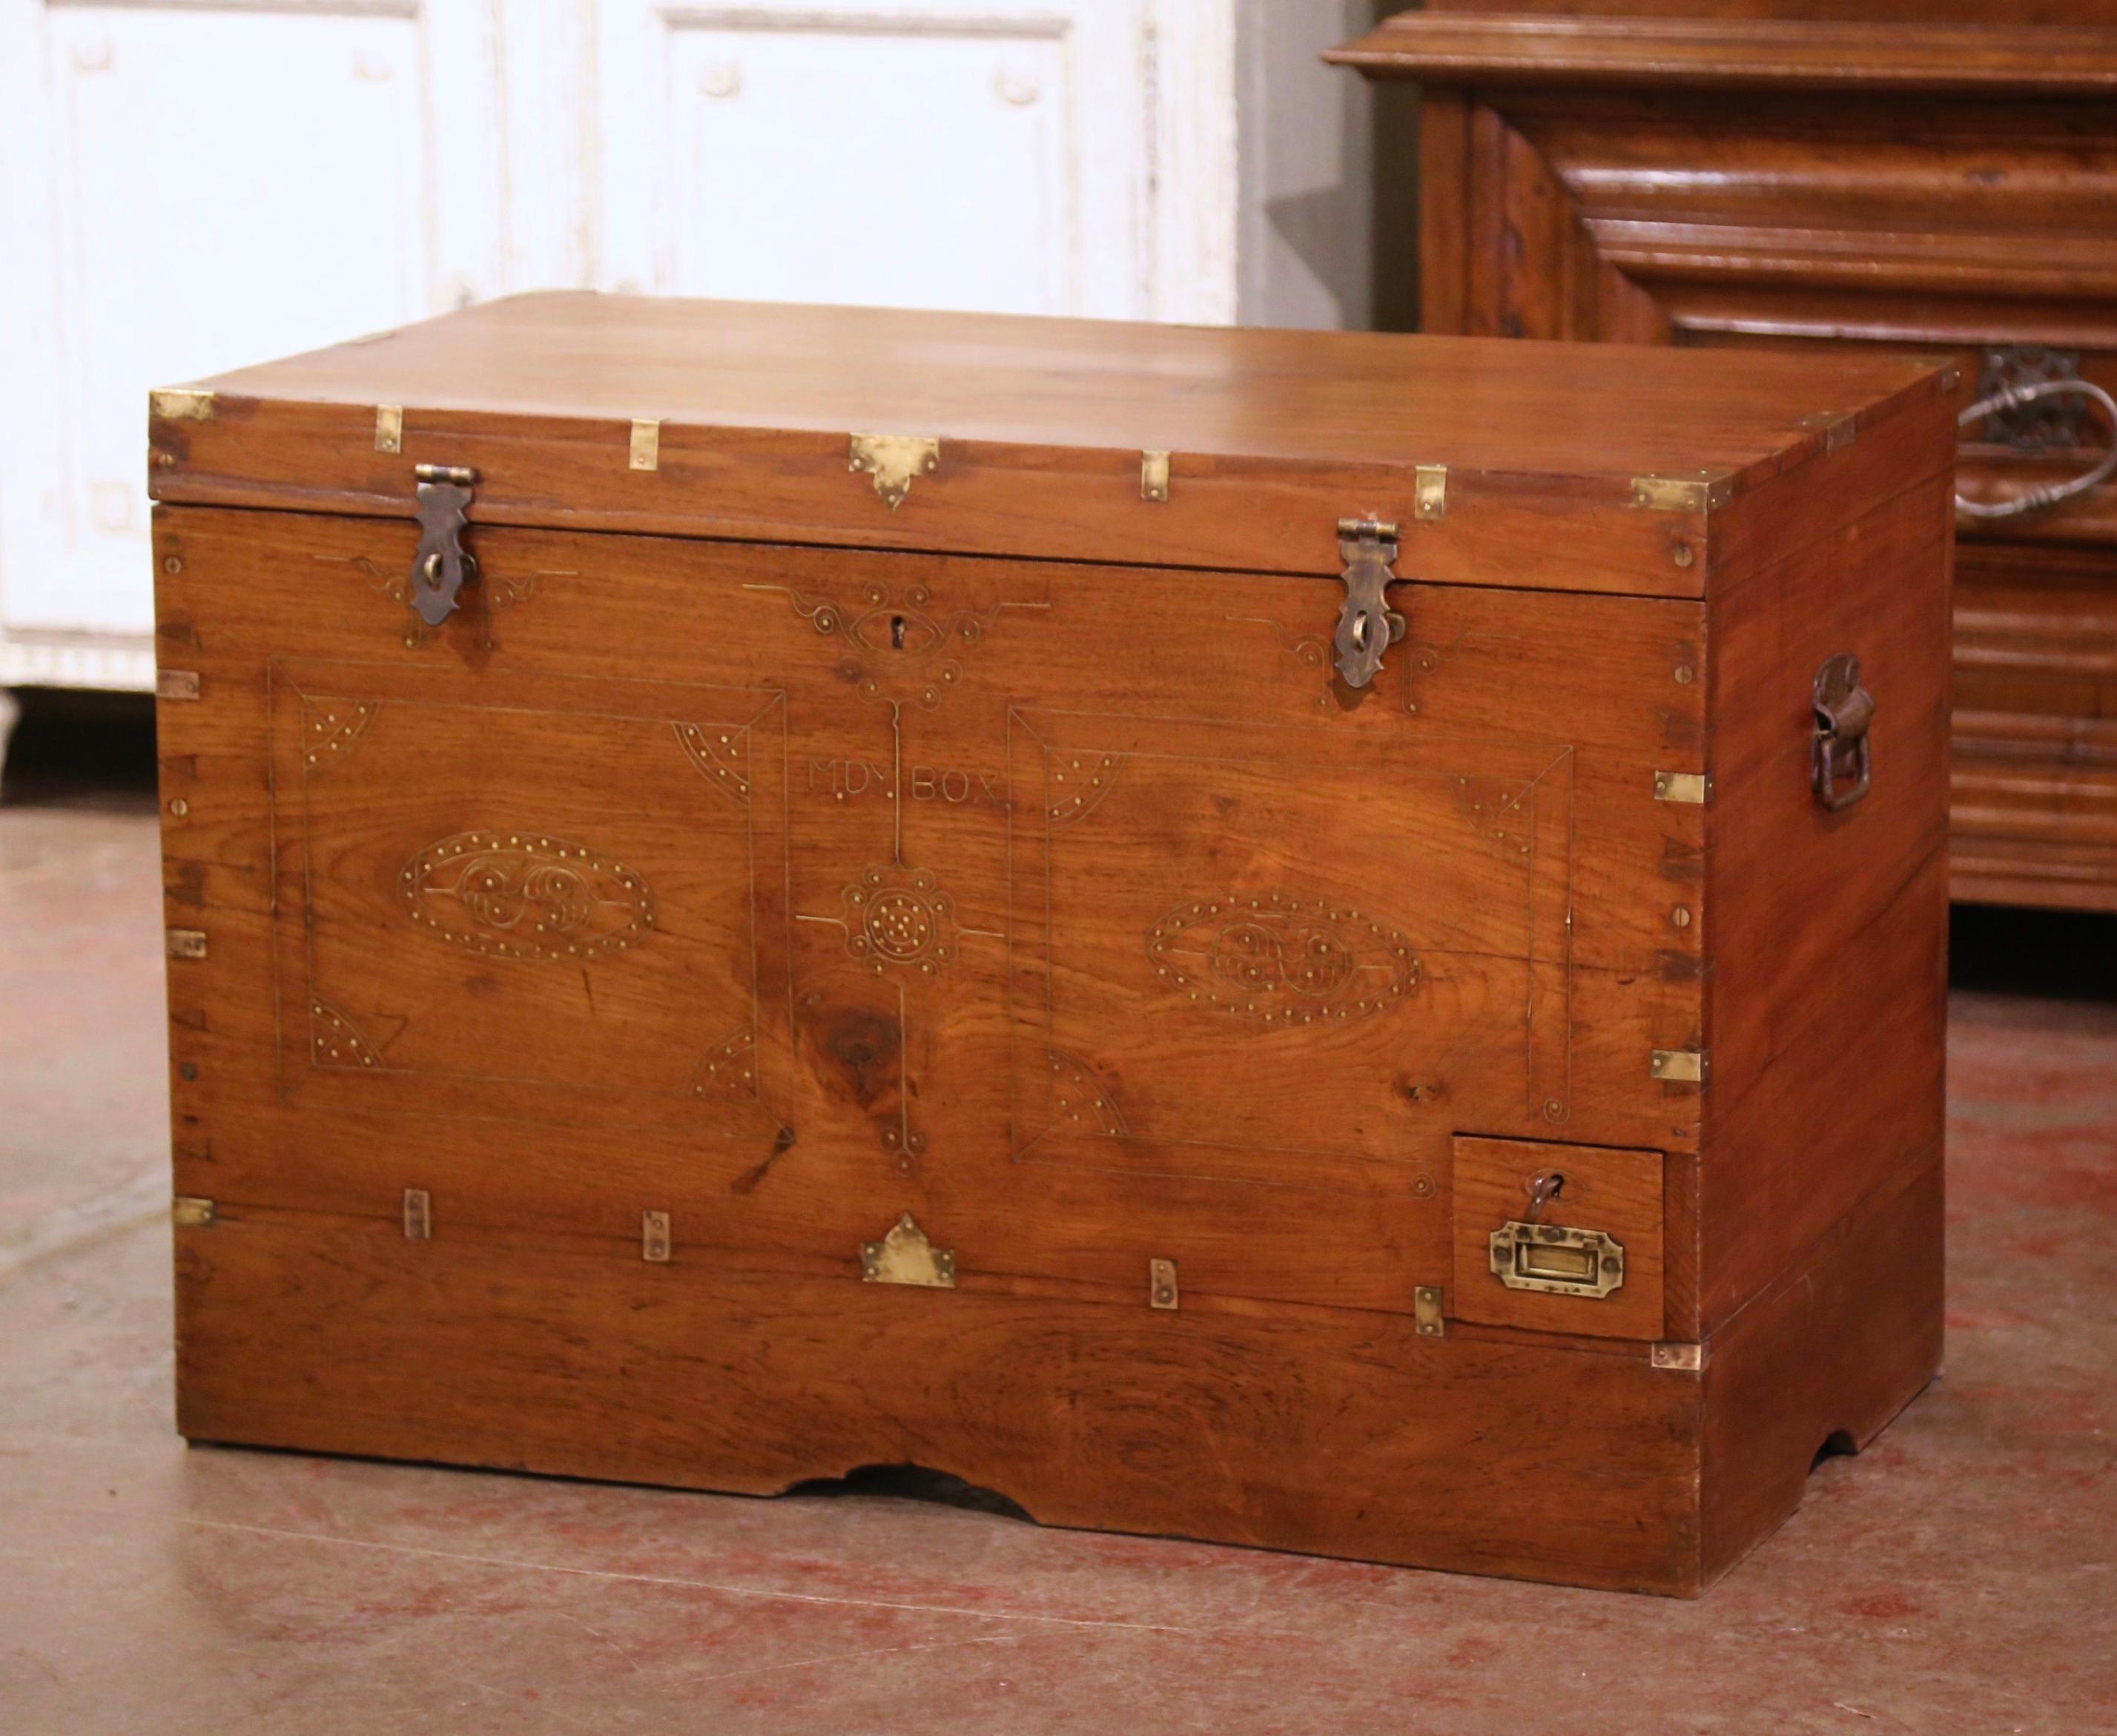 This is a very rare antique Victorian colonial teak Mandalay campaign box, possibly used by an officer or government official in the British Raj or military in Burma while on campaign, circa 1860. Made of chestnut, the piece is simply finished on